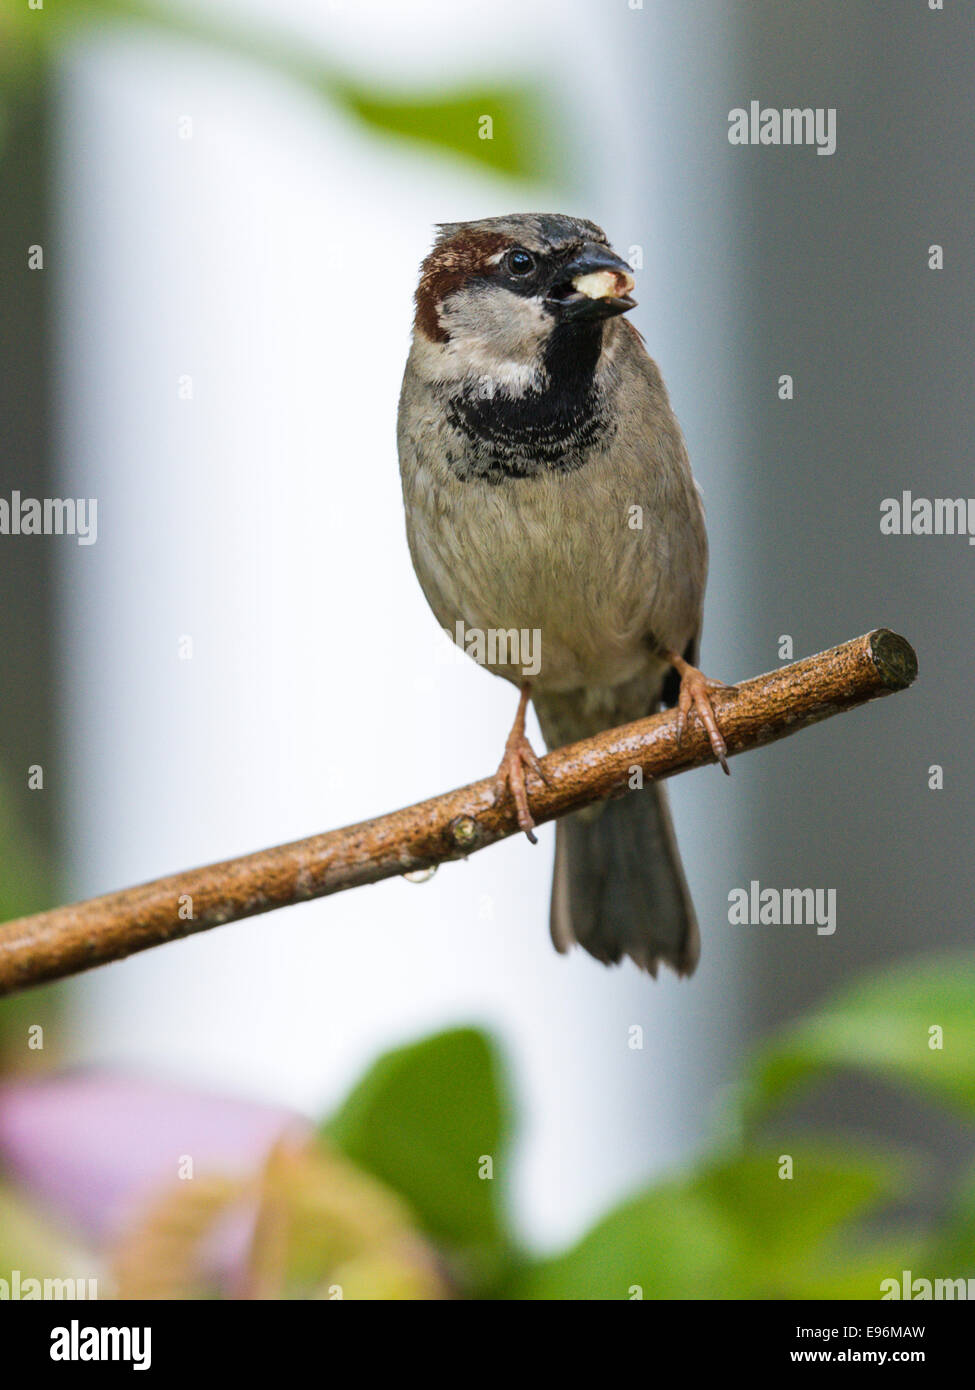 House Sparrow [Passeridae] perched on a magnolia branch in a garden setting with a small piece of food (Peanut) in its beak. Stock Photo